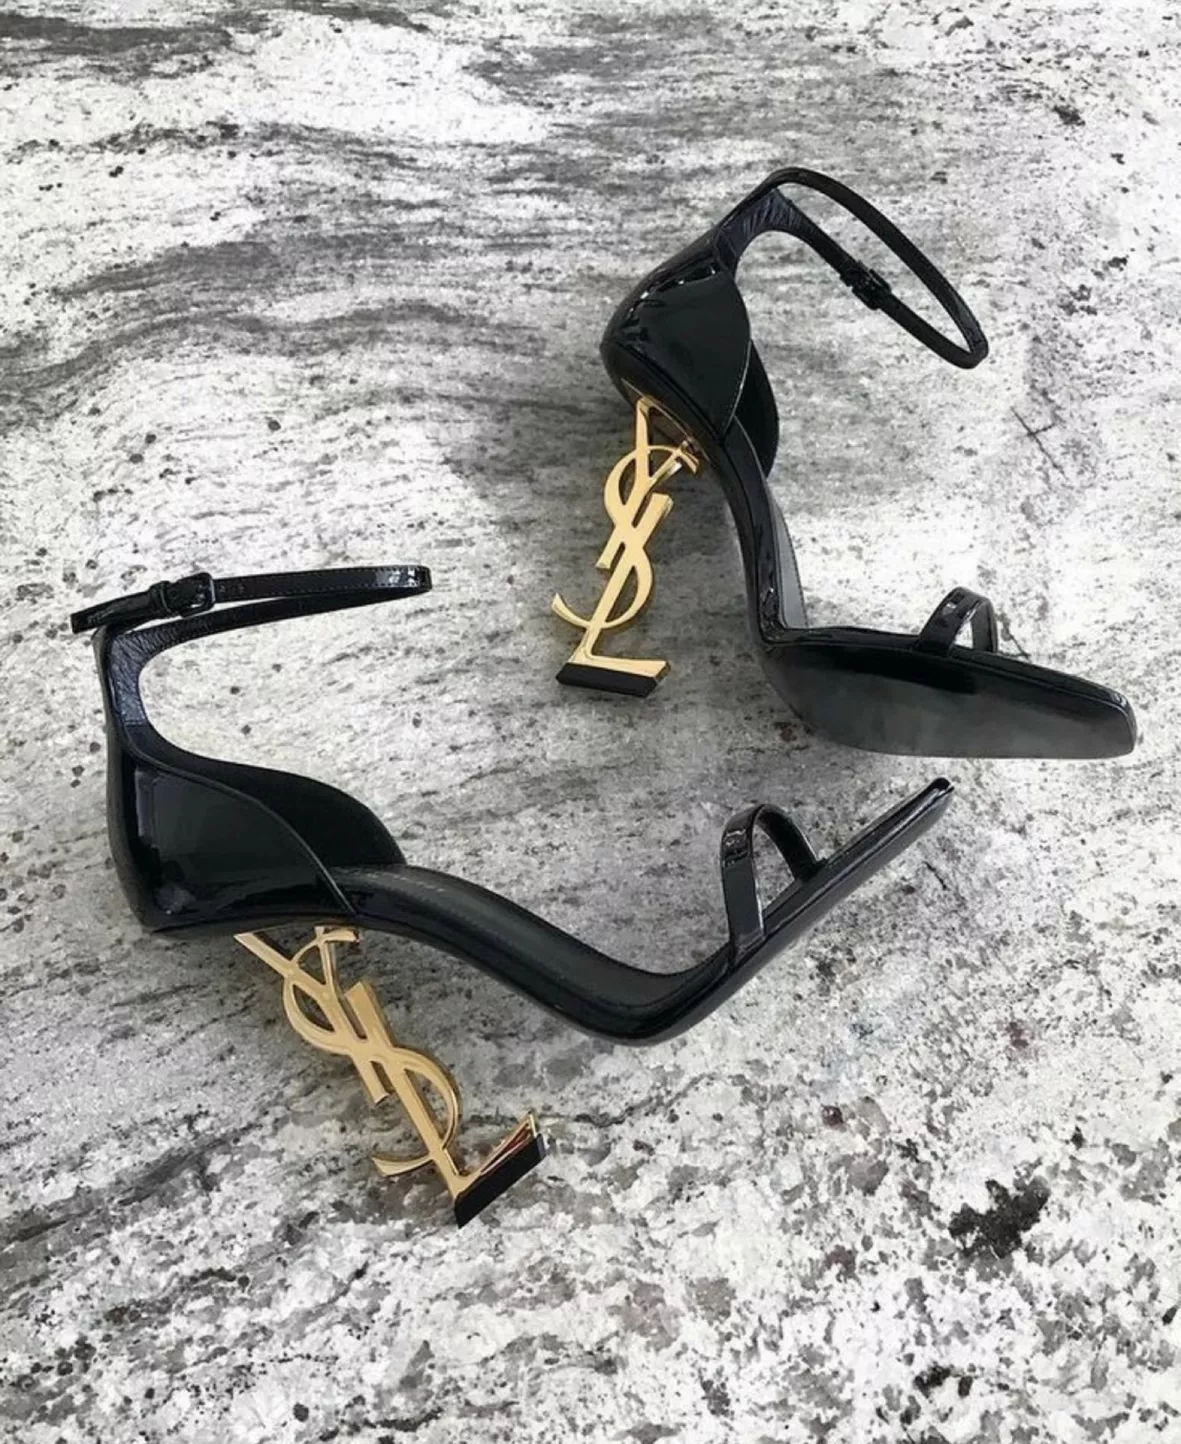 Louis Vuitton black leather buckle heels from 2005 : r/Shoes